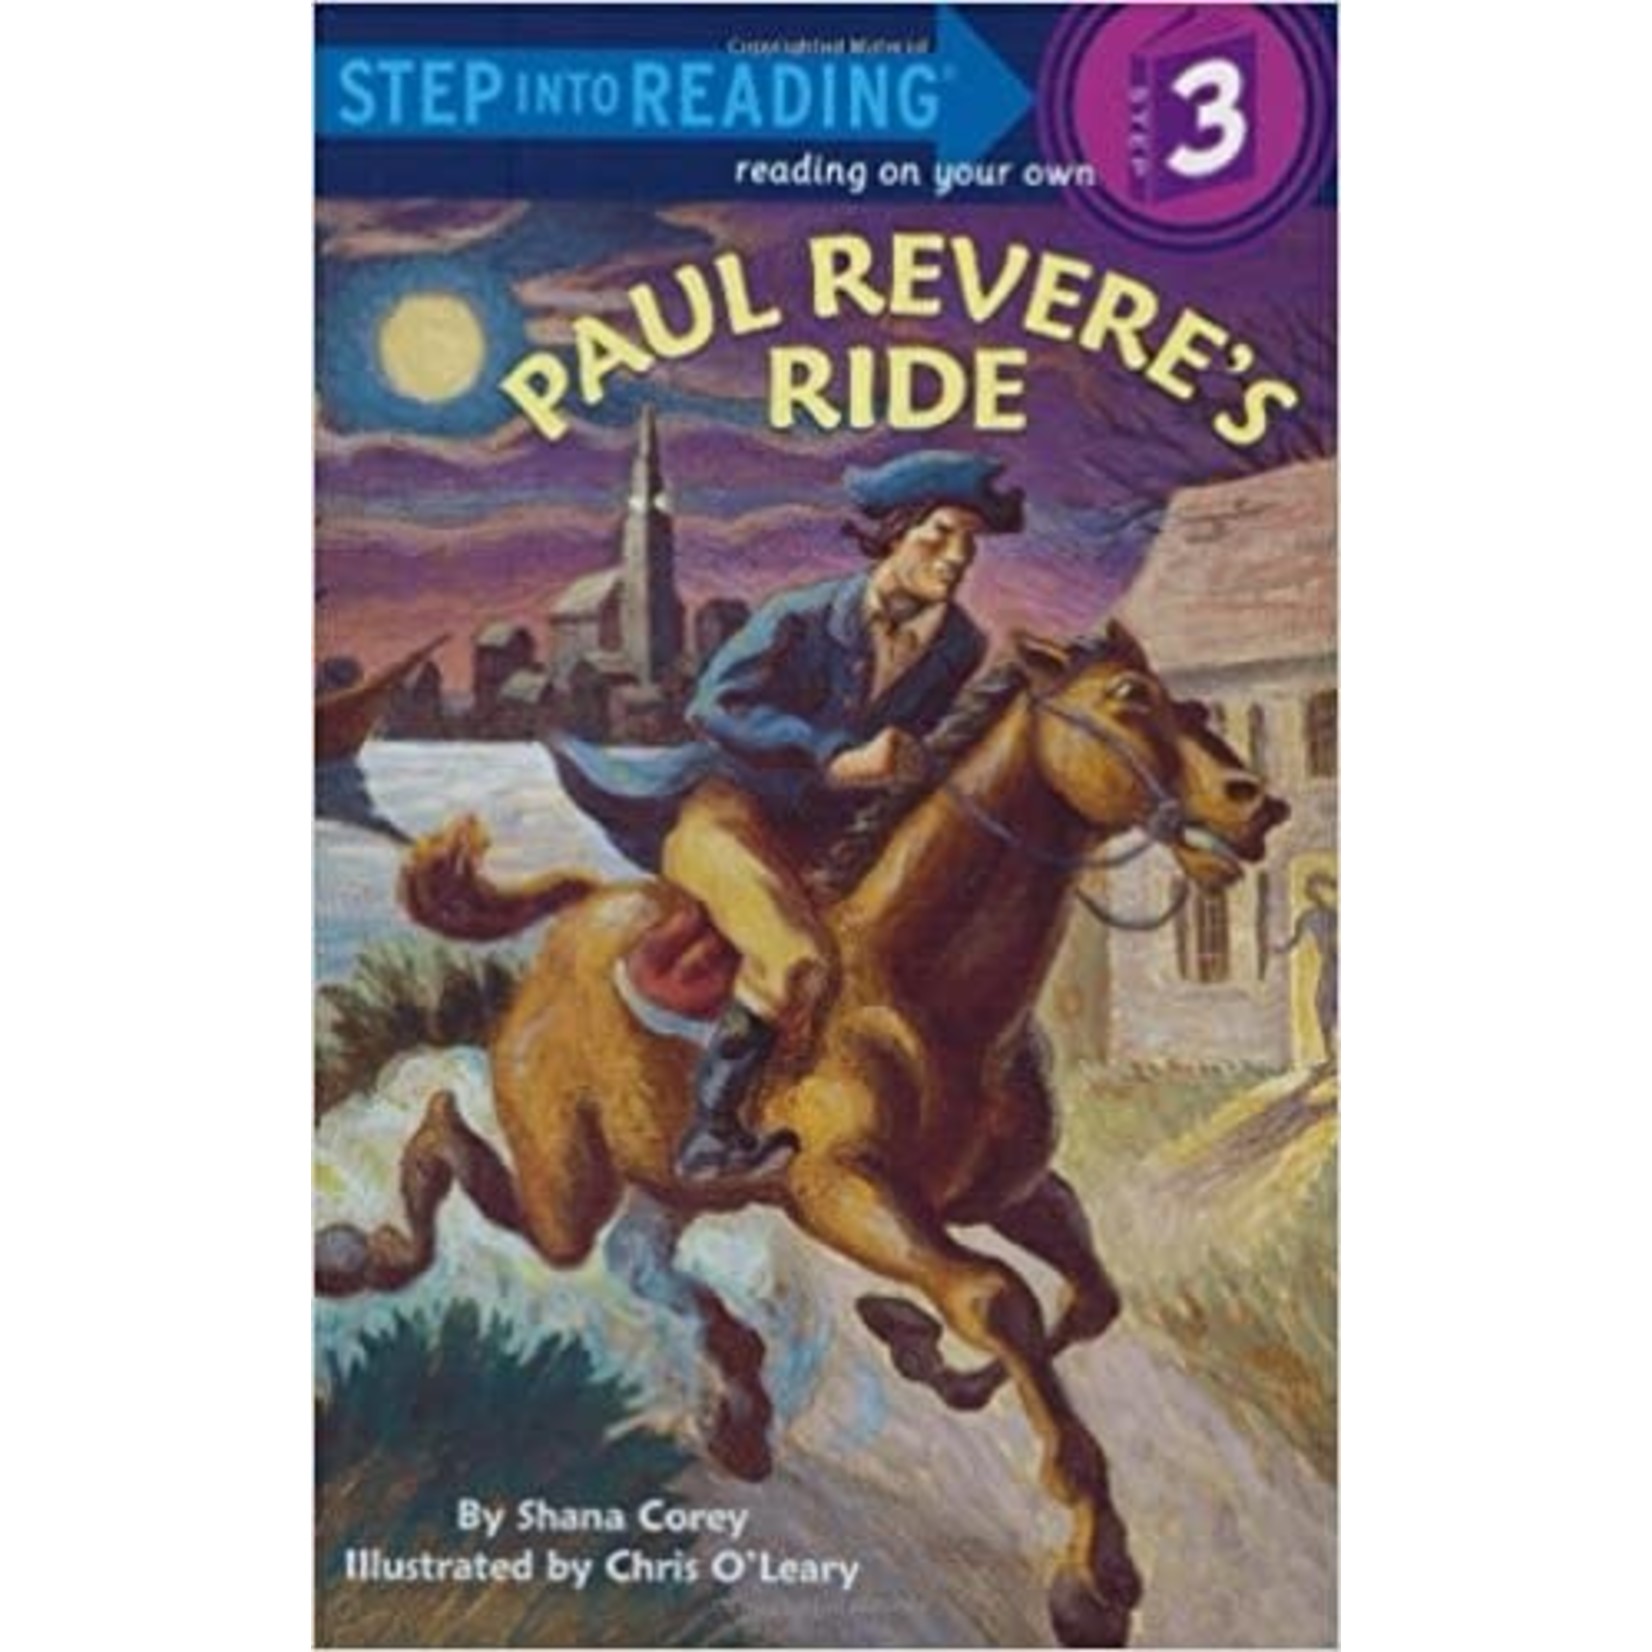 Paul Revere's Ride - Step into Reading 3